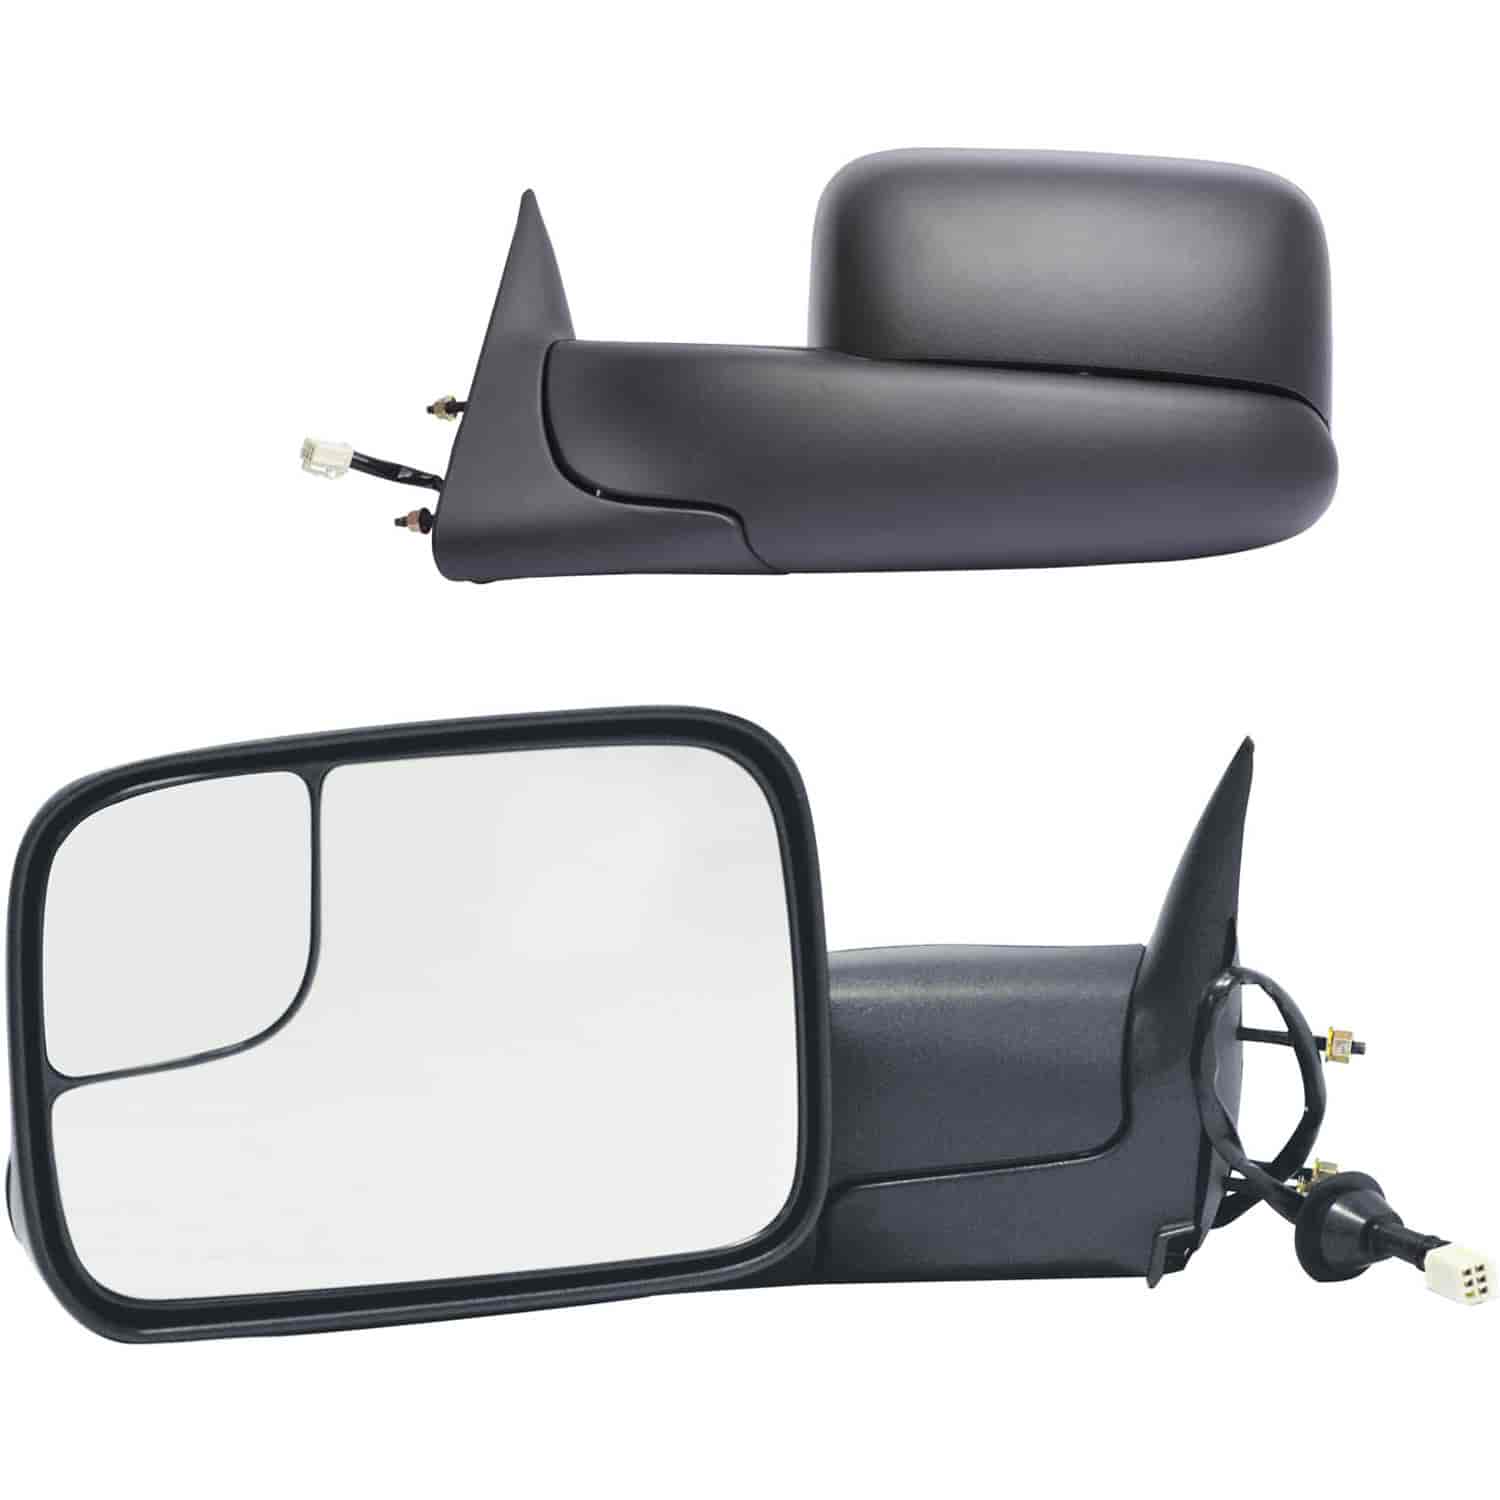 OEM Style Replacement mirror set for 98-01 1500 98-02 2500/ 3500 Dodge Ram Pick-Up w/towing pkg spot